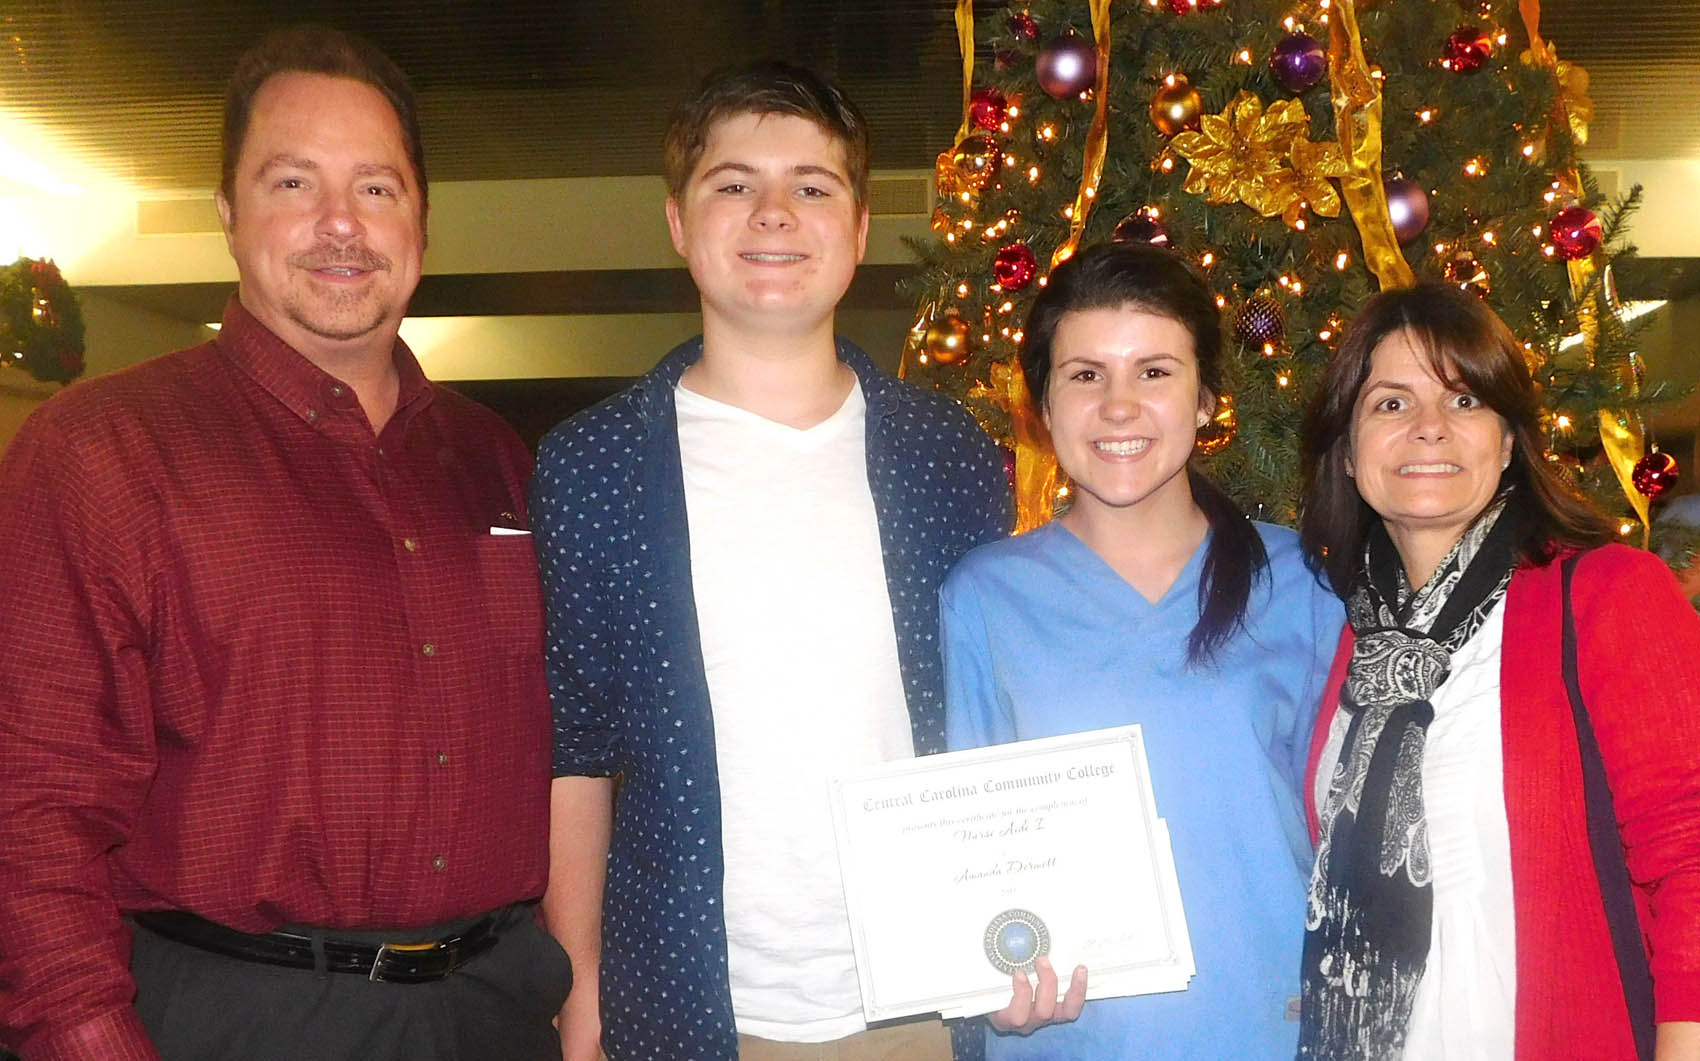 Click to enlarge,  Amanda Dermott, of Dunn, and her family celebrate her Nurse Aide I certification at the Central Carolina Community College Continuing Education medical program graduation. 'Tonight is great. It's the start of my nursing career,' said Dermott. The graduation event was held Dec. 10 at the Dennis A. Wicker Civic Center in Sanford. For more information about Continuing Education medial programs, call the CCCC Economic and Community Development Division Student Support Center at (919) 718-7500. 